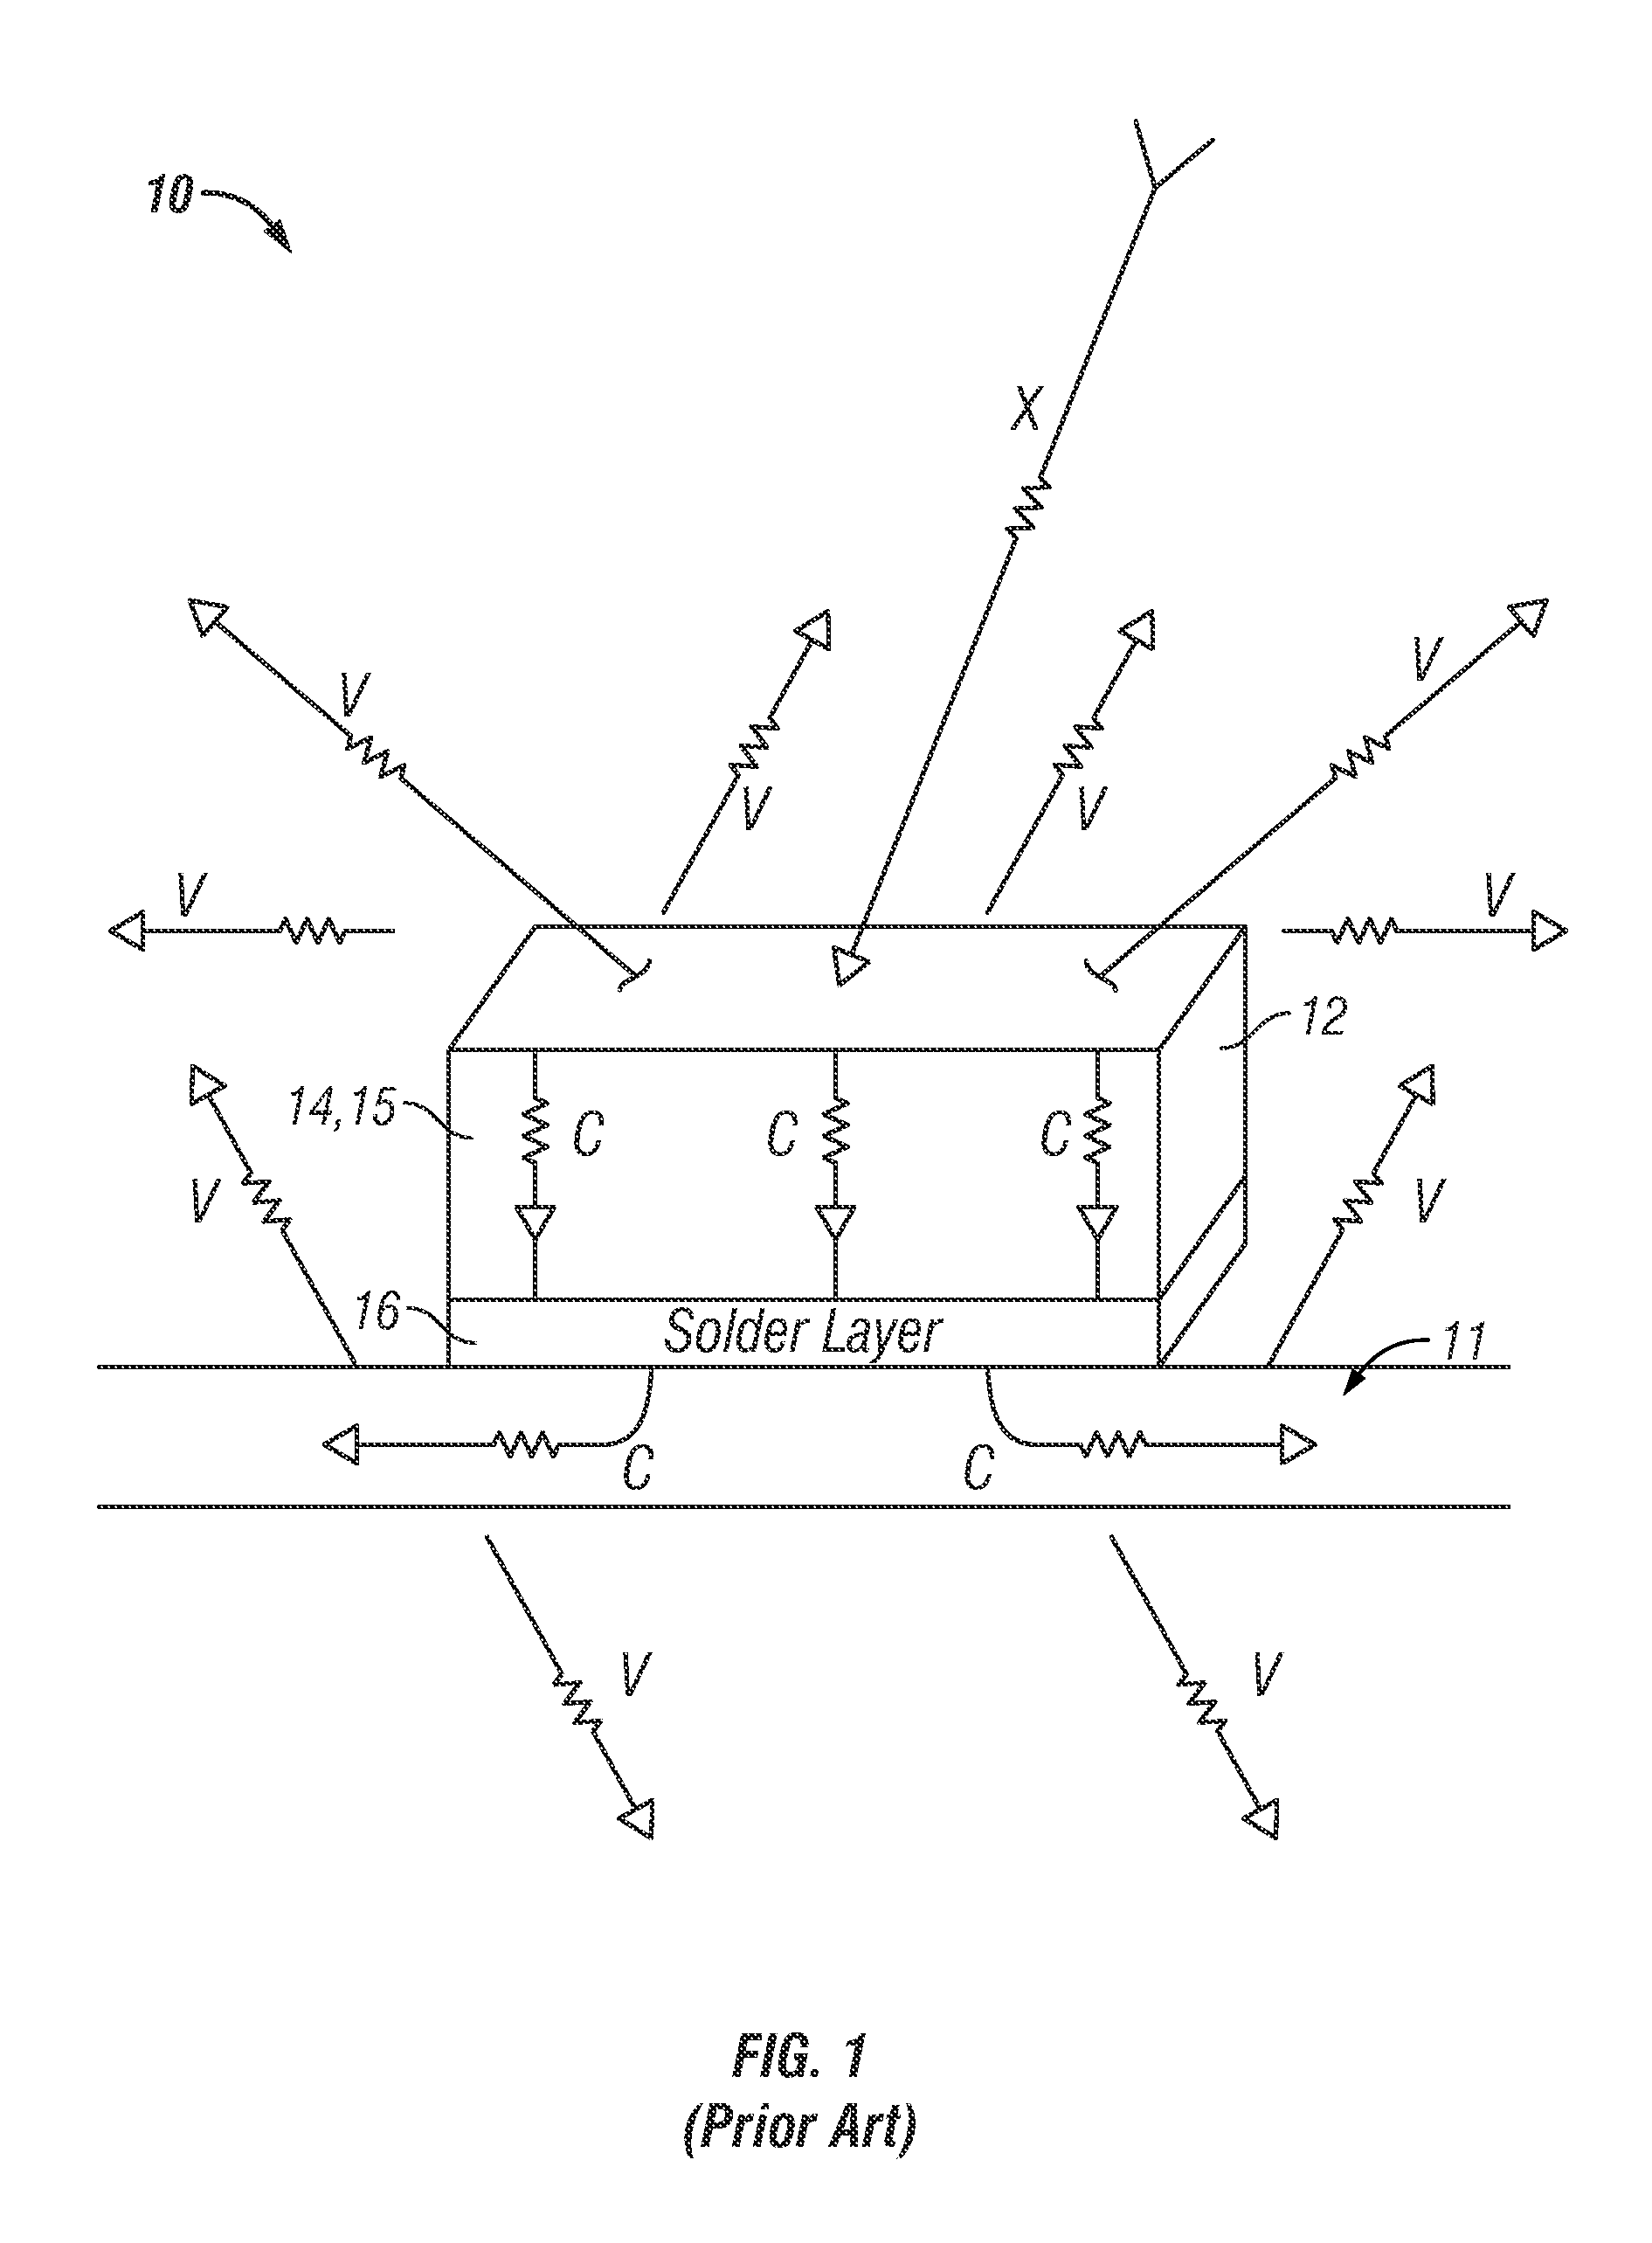 Integral heater assembly and method for carrier or host board of electronic package assembly